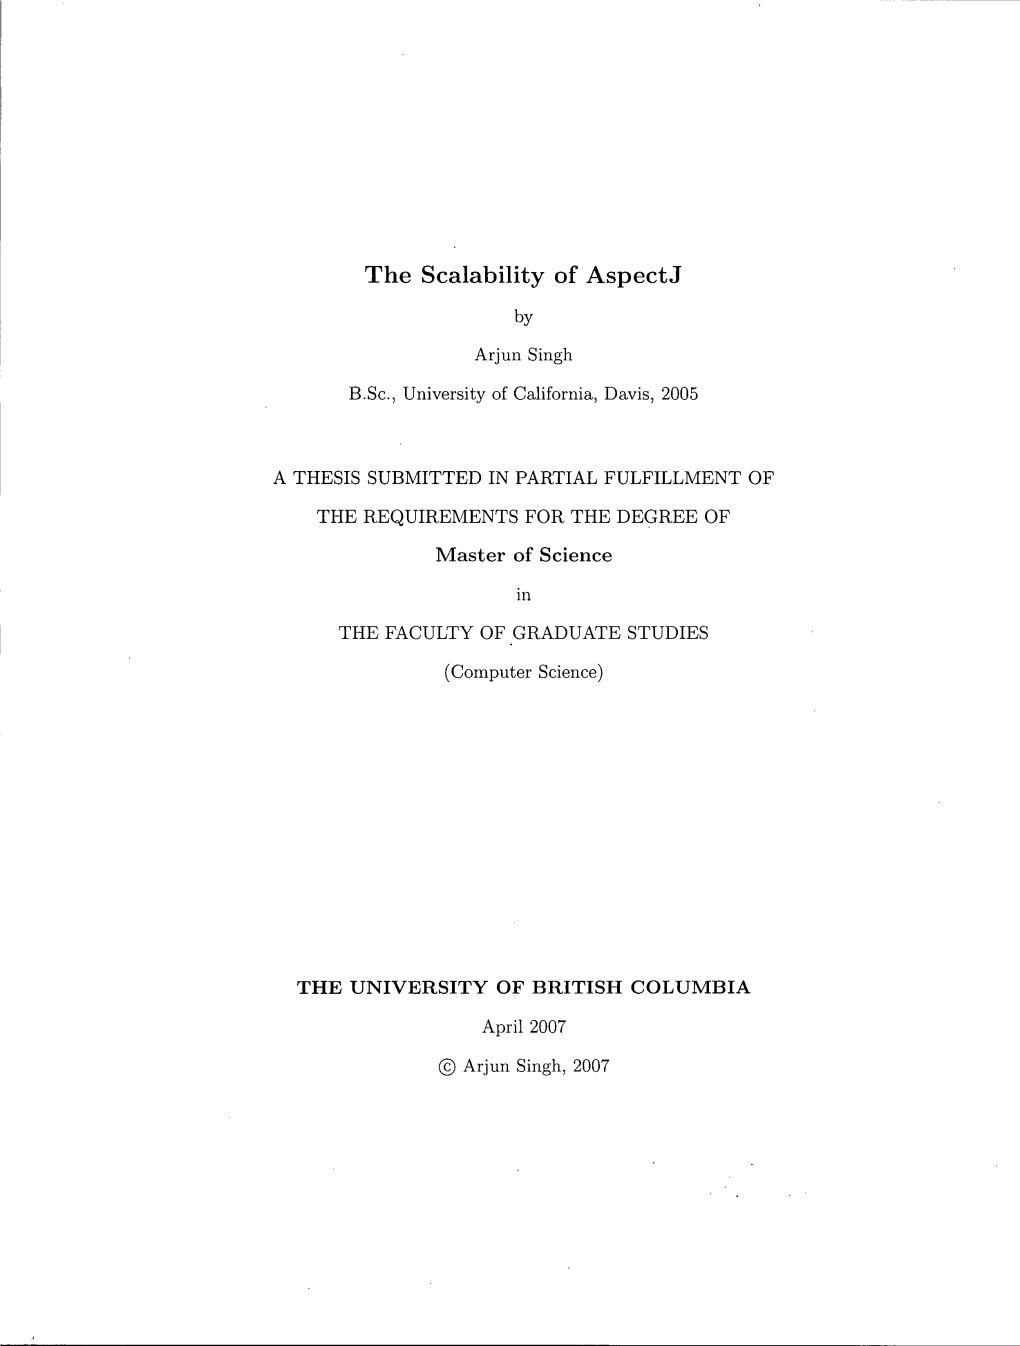 The Scalability of Aspectj Master of Science THE